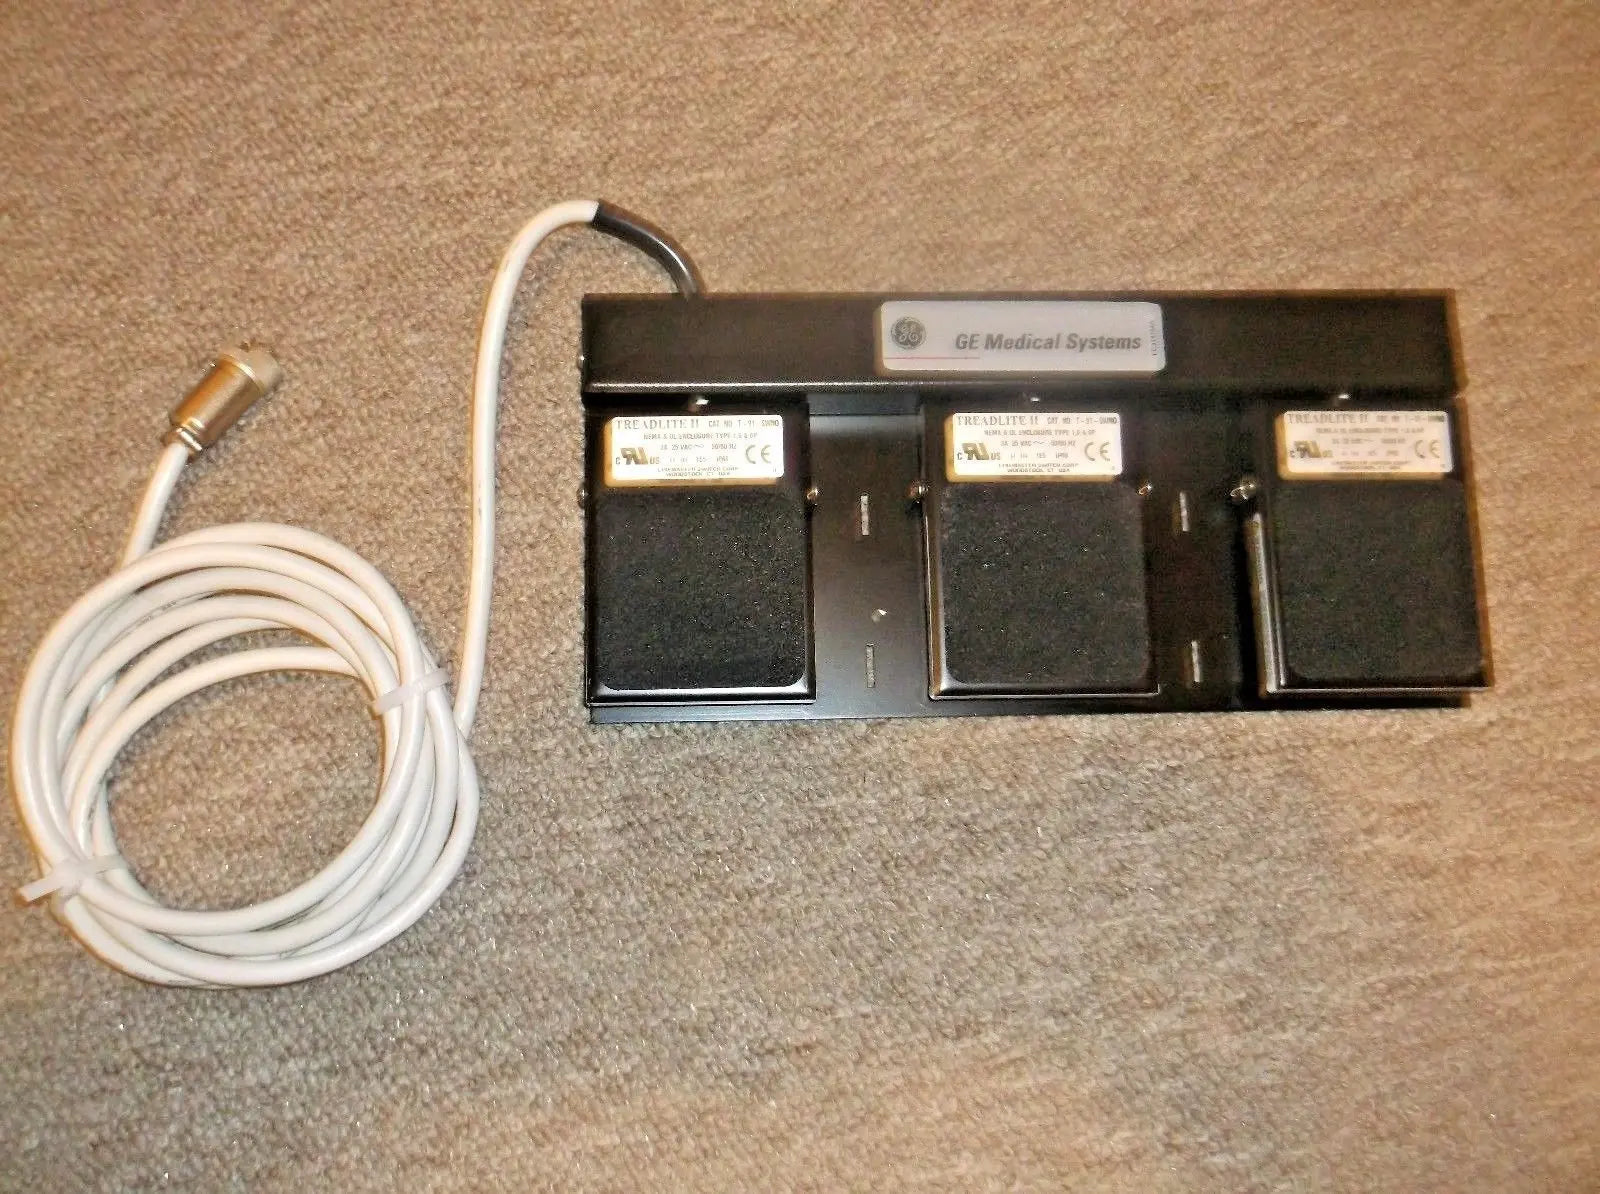 GE FB200952 Medical Ultrasound Foot Switch Pedal Unit For Vivid 7 System